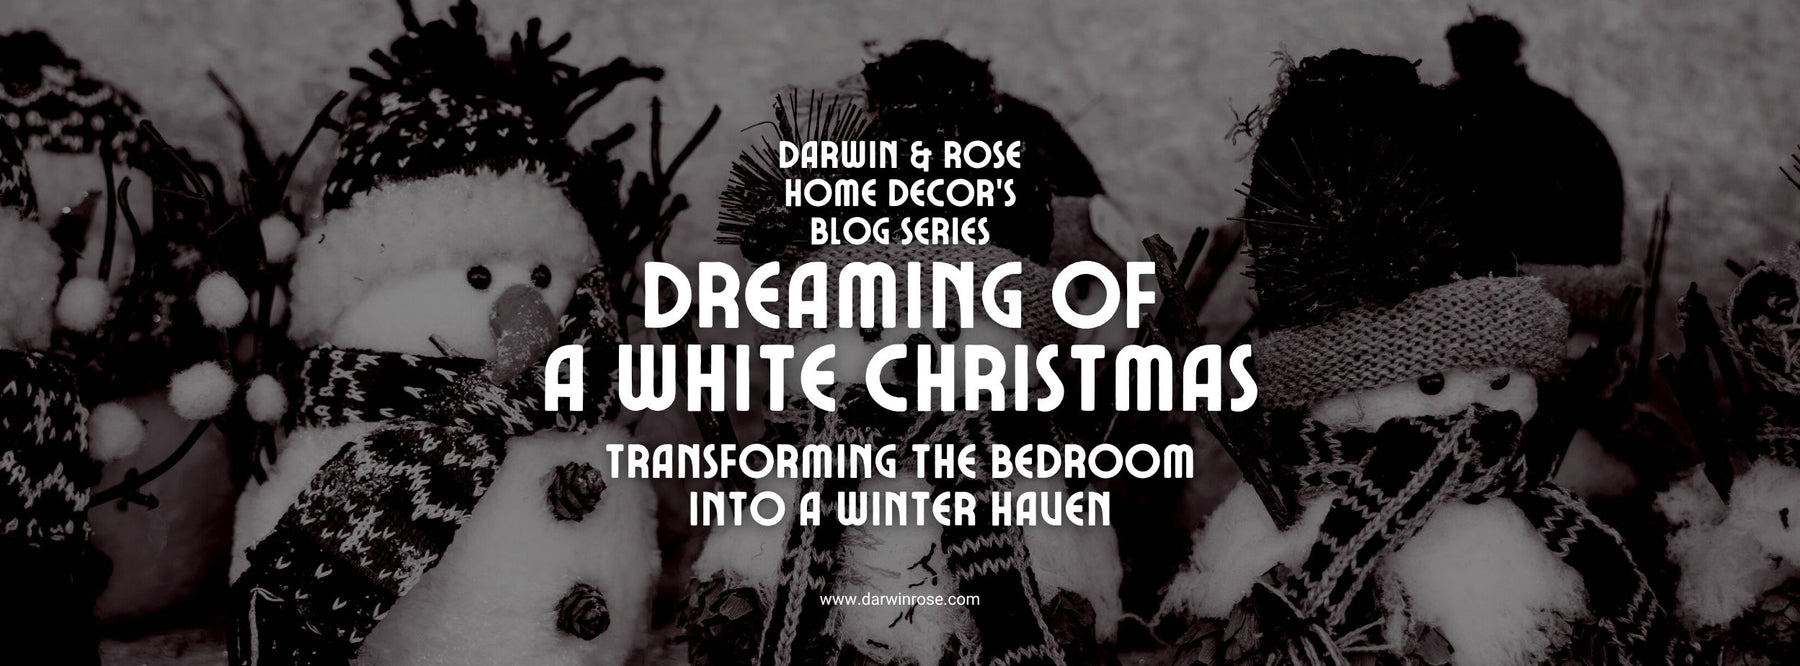 Dreaming of a White Christmas: Transforming the Bedroom into a Winter Haven